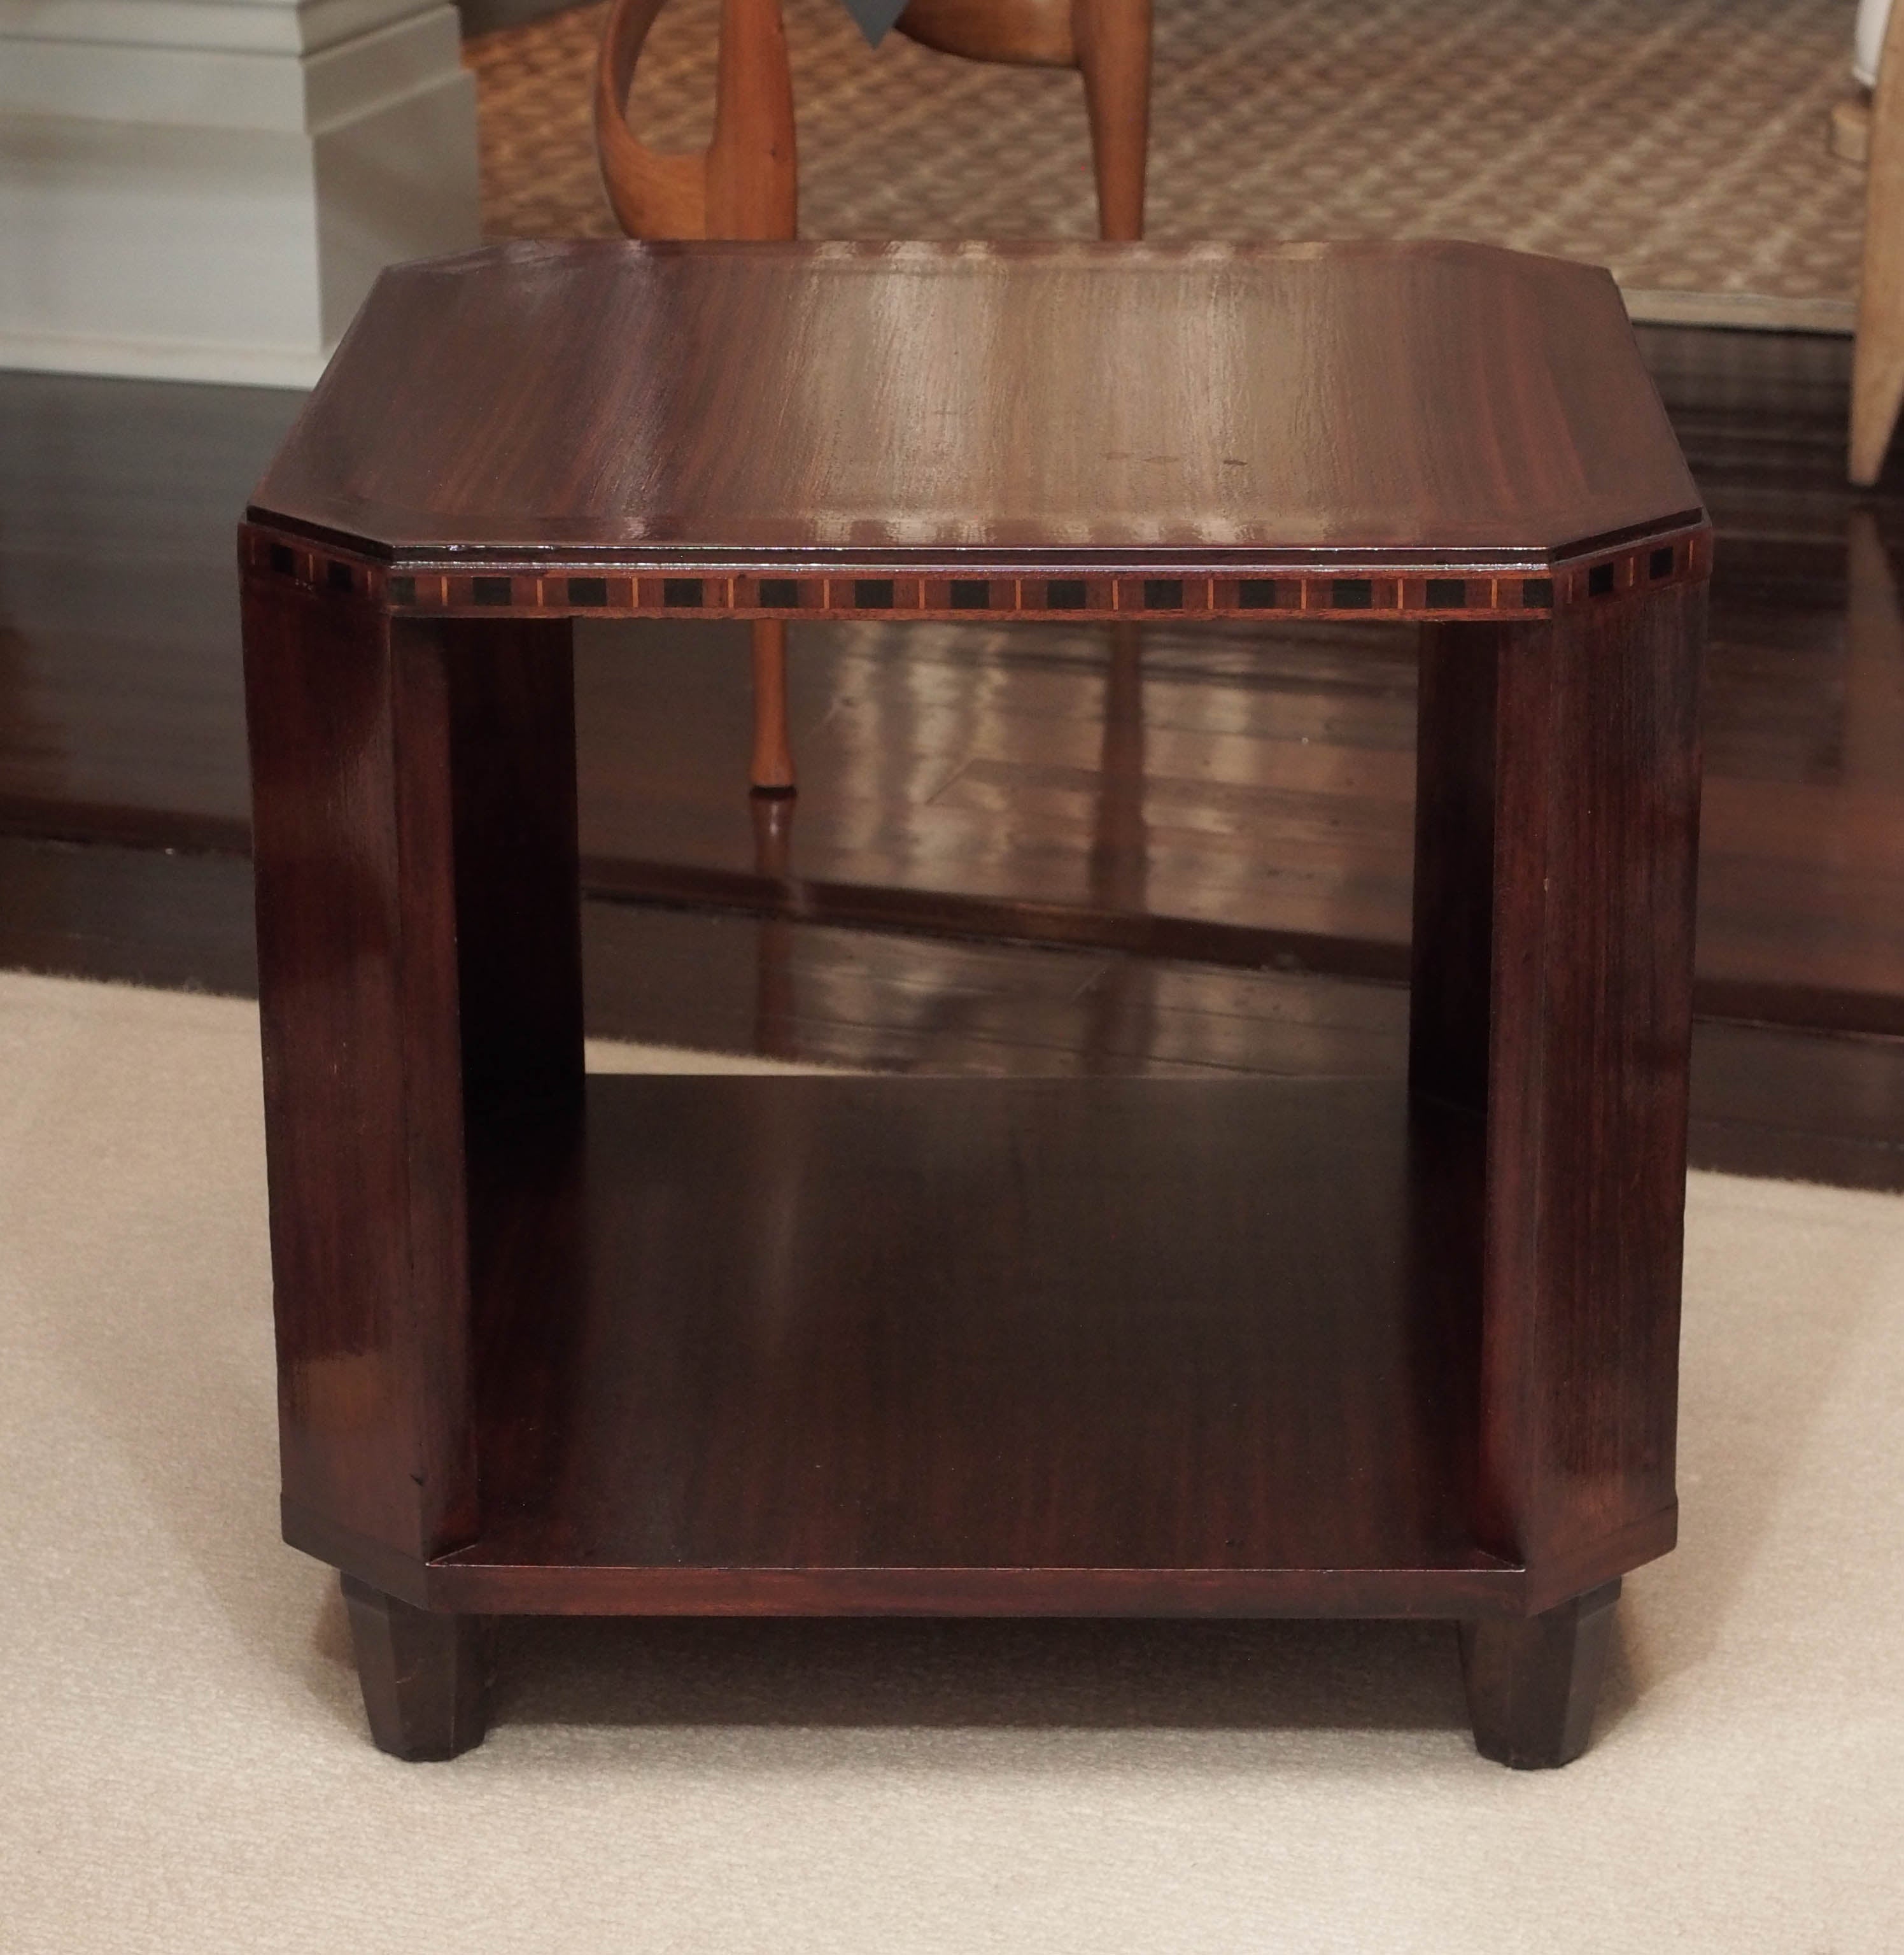 Two-tier side table in mahogany; canted corners; the top apron with a band of ebony and fruitwoods; hexagonal feet.